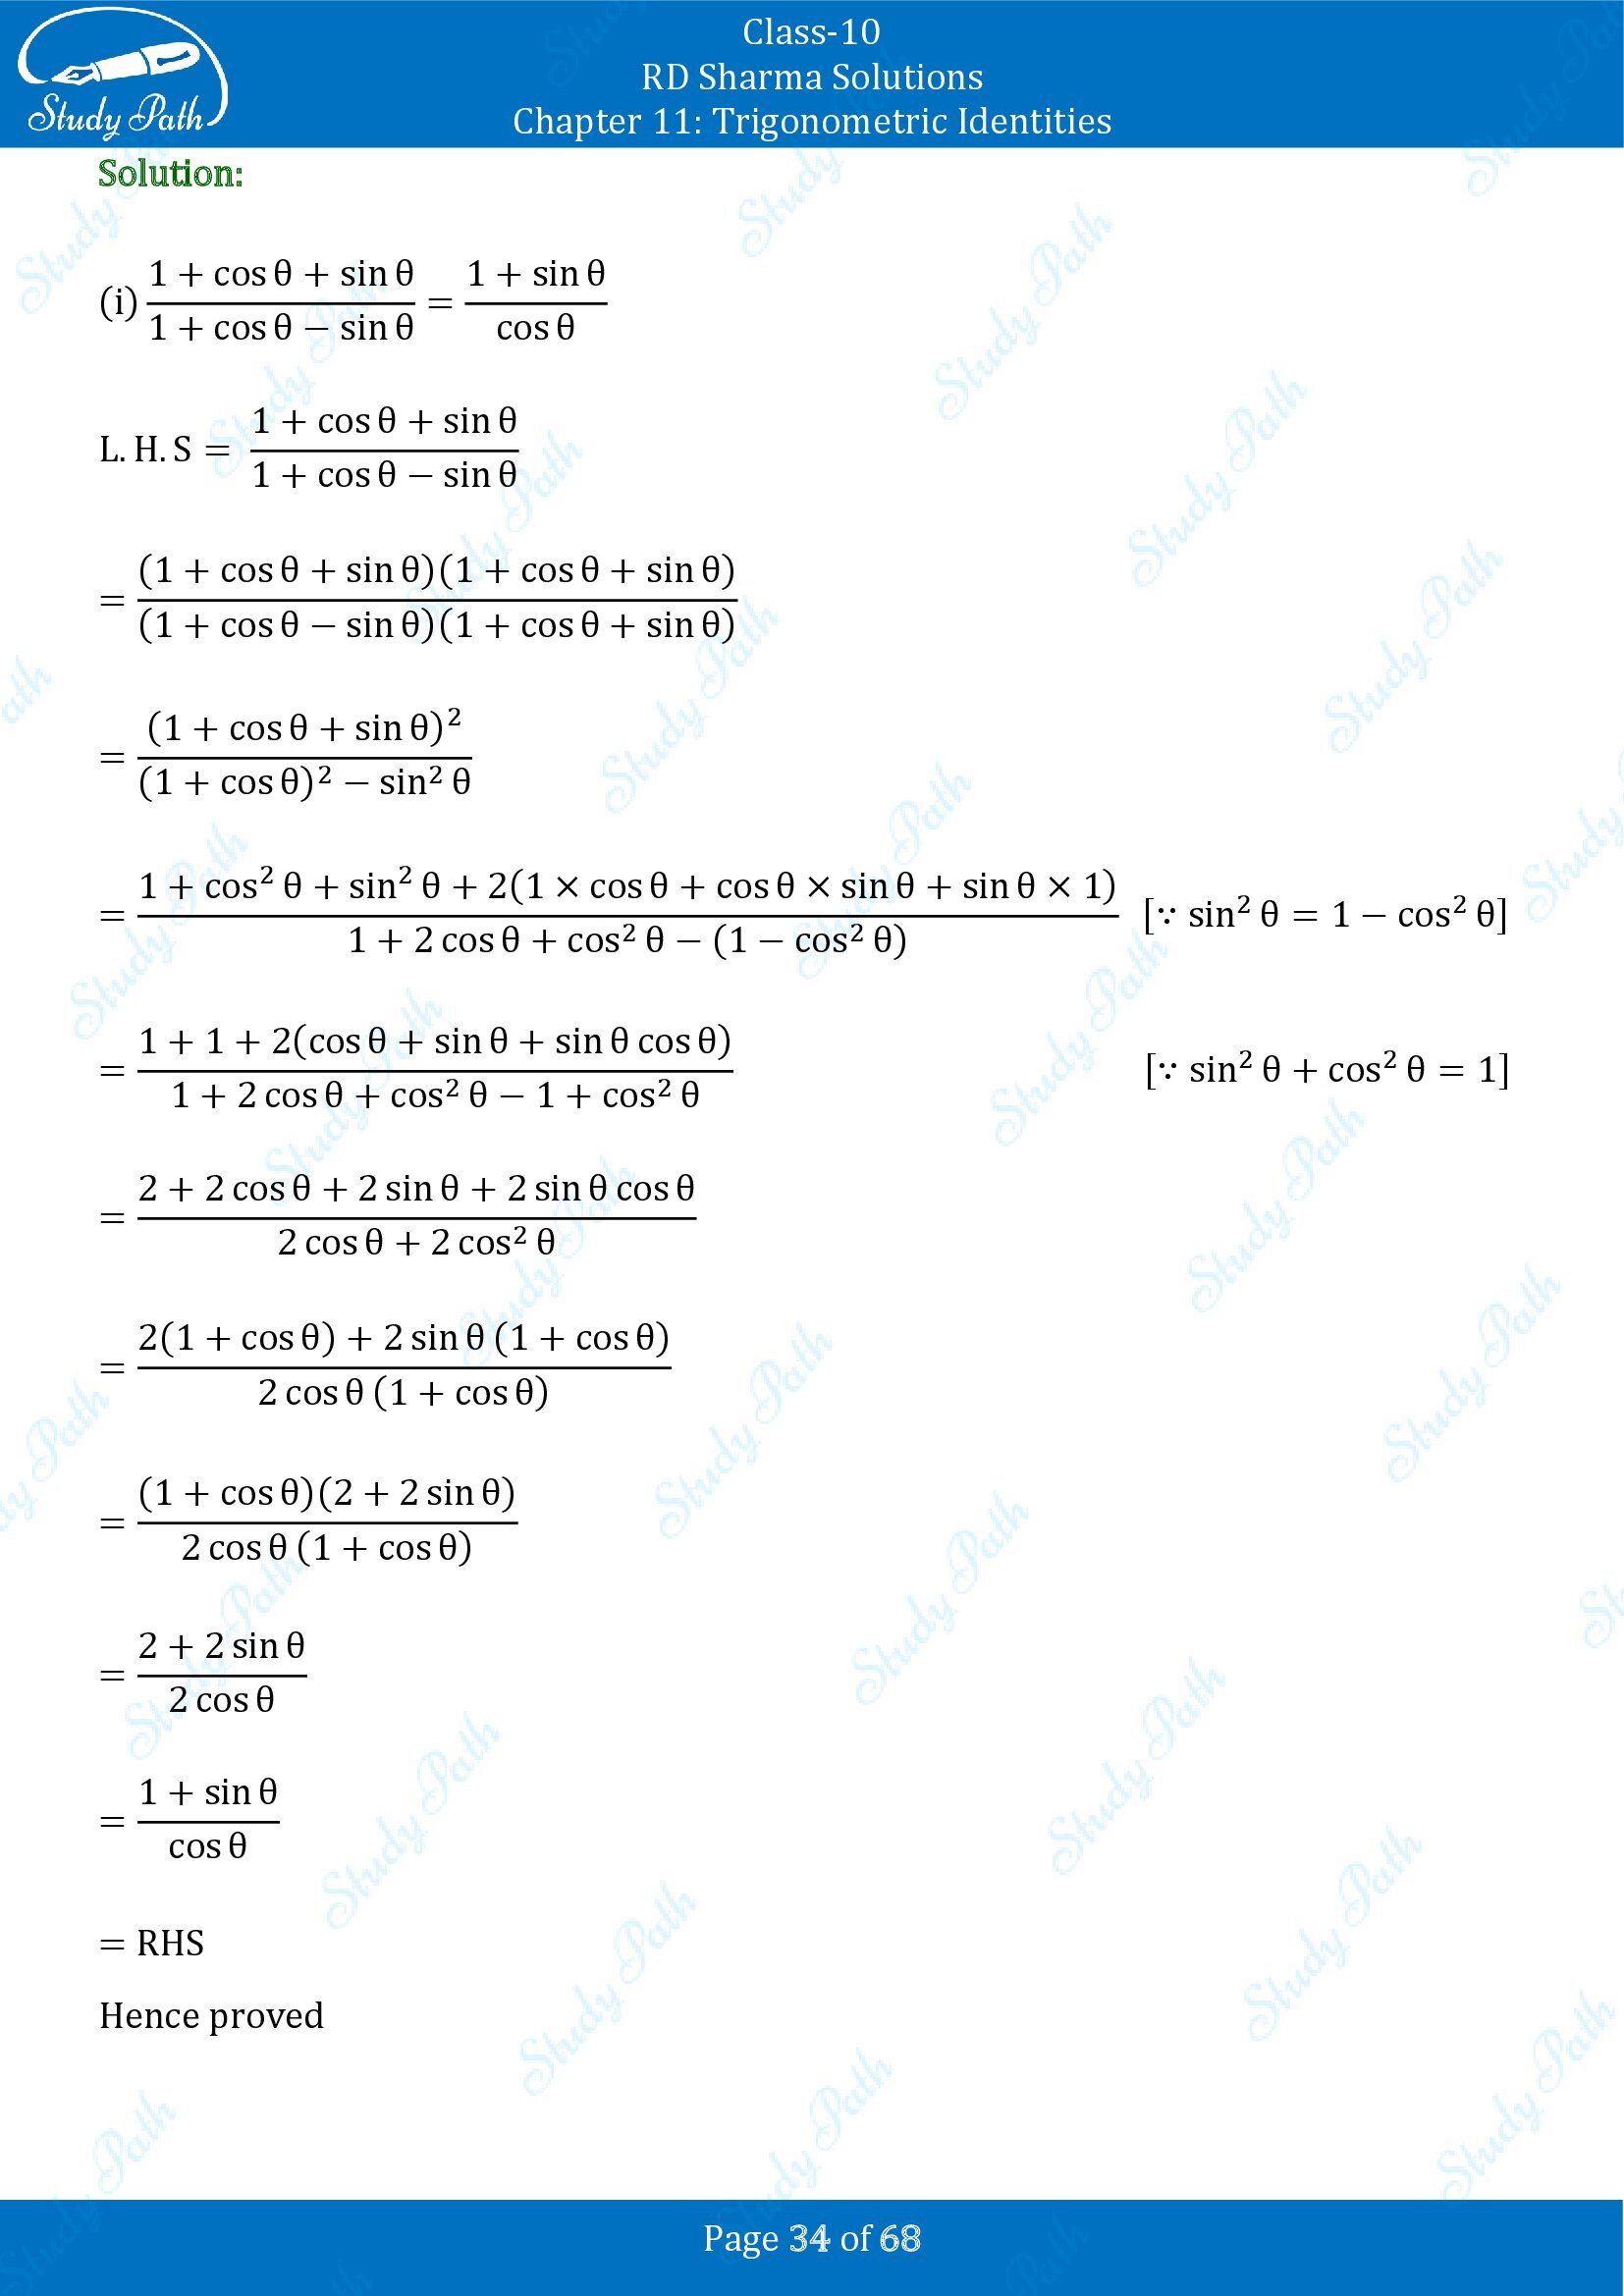 RD Sharma Solutions Class 10 Chapter 11 Trigonometric Identities Exercise 11.1 00034